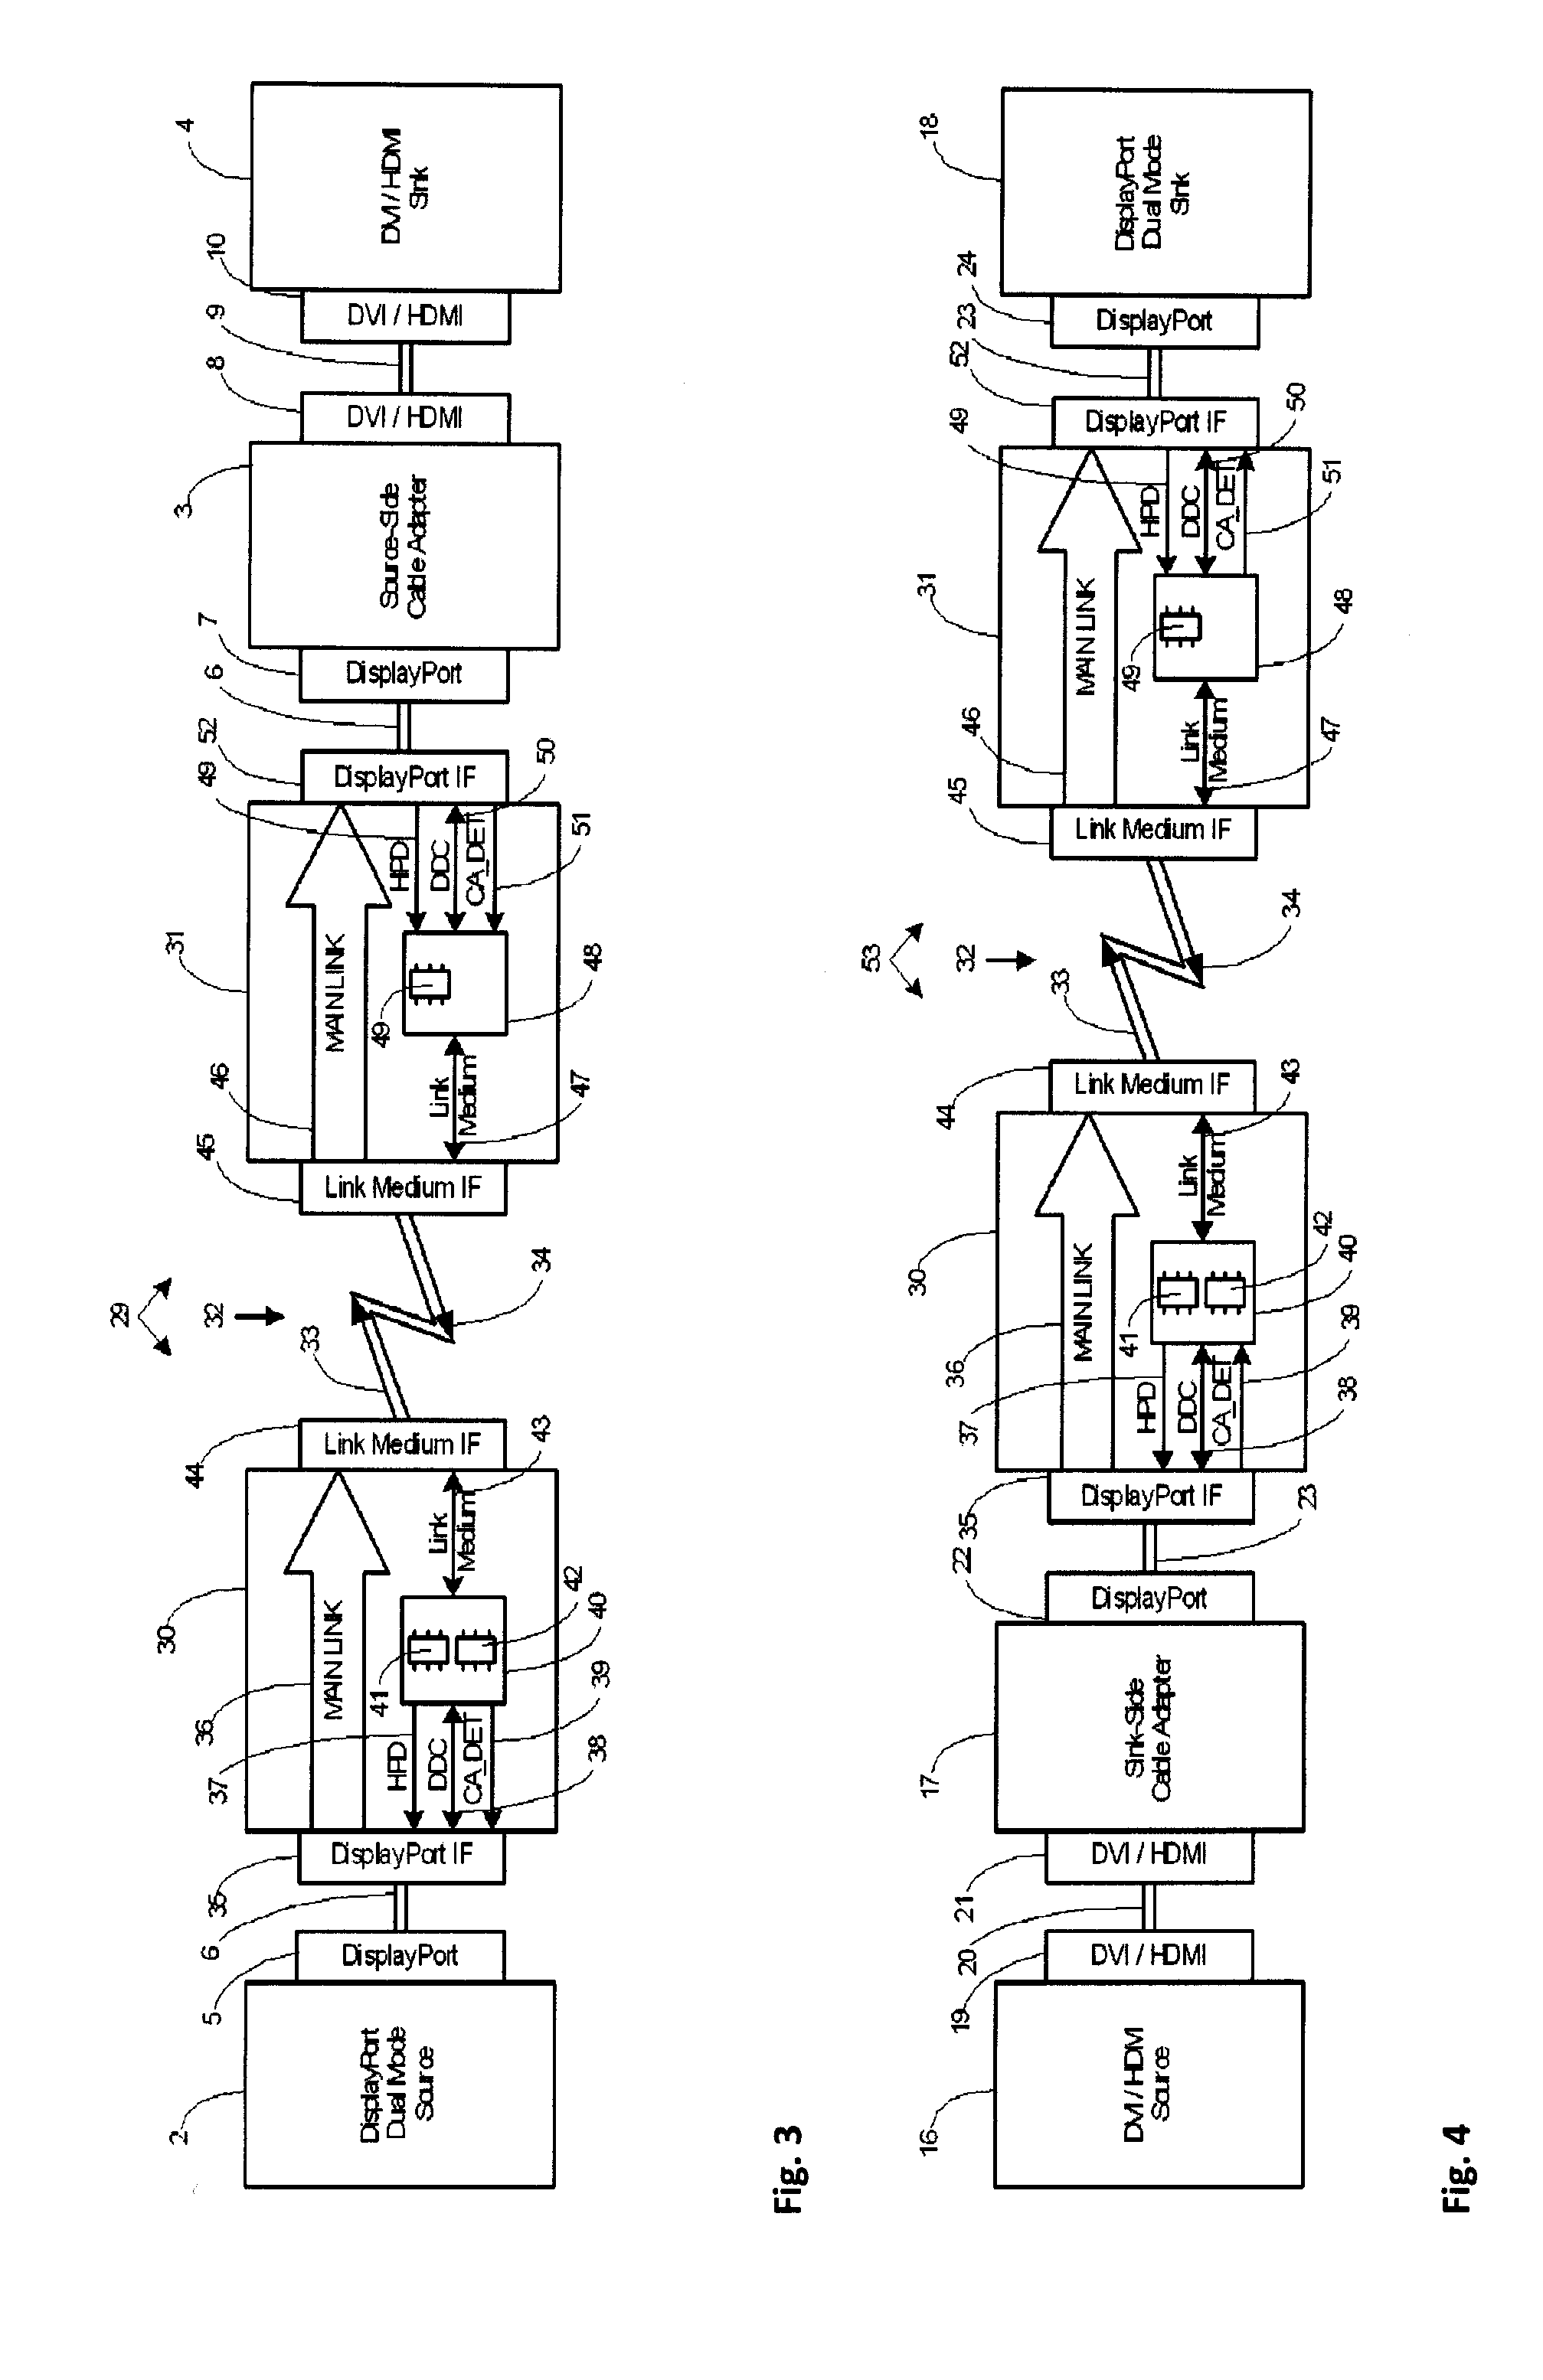 Method And System For Communicating Display Port and Single-Link DVI/HDMI Information For Dual-Mode Devices